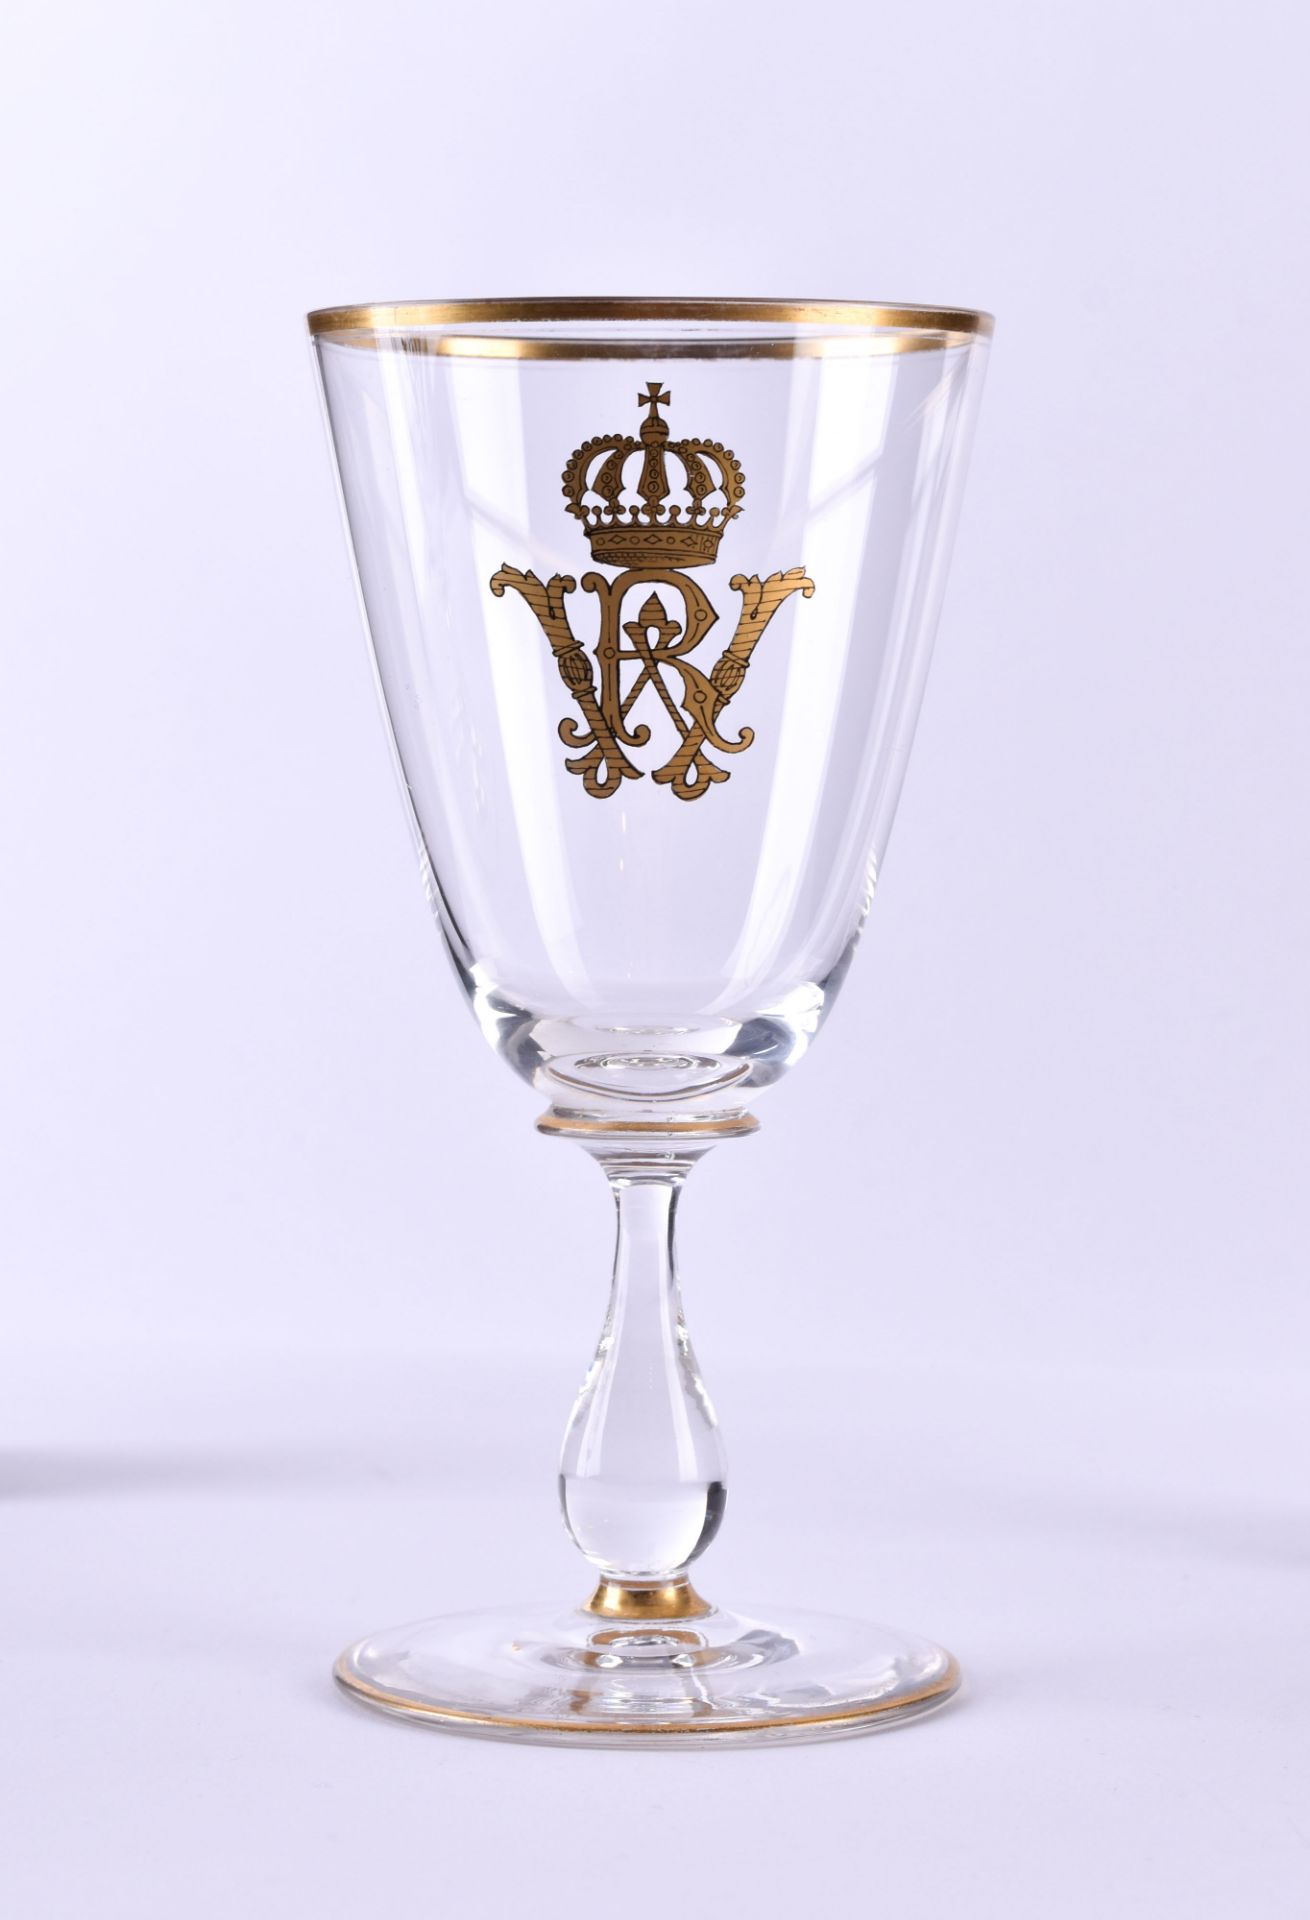 Wine goblet from a service for Kaiser Wilhelm II